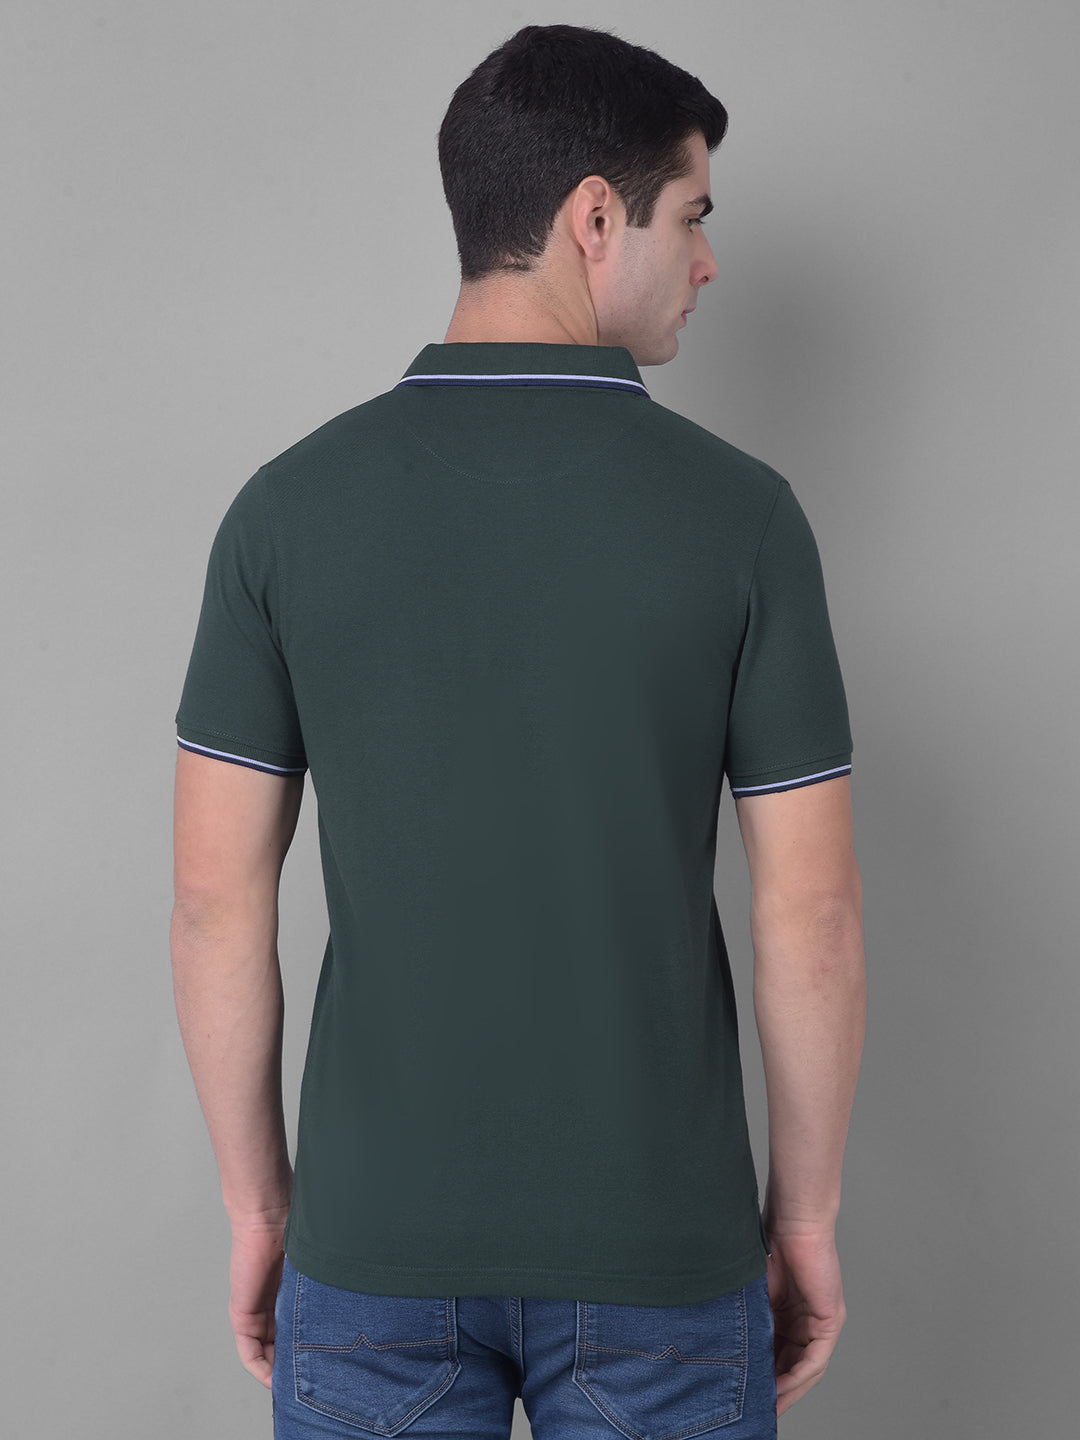 cobb solid bottle green polo neck t-shirt